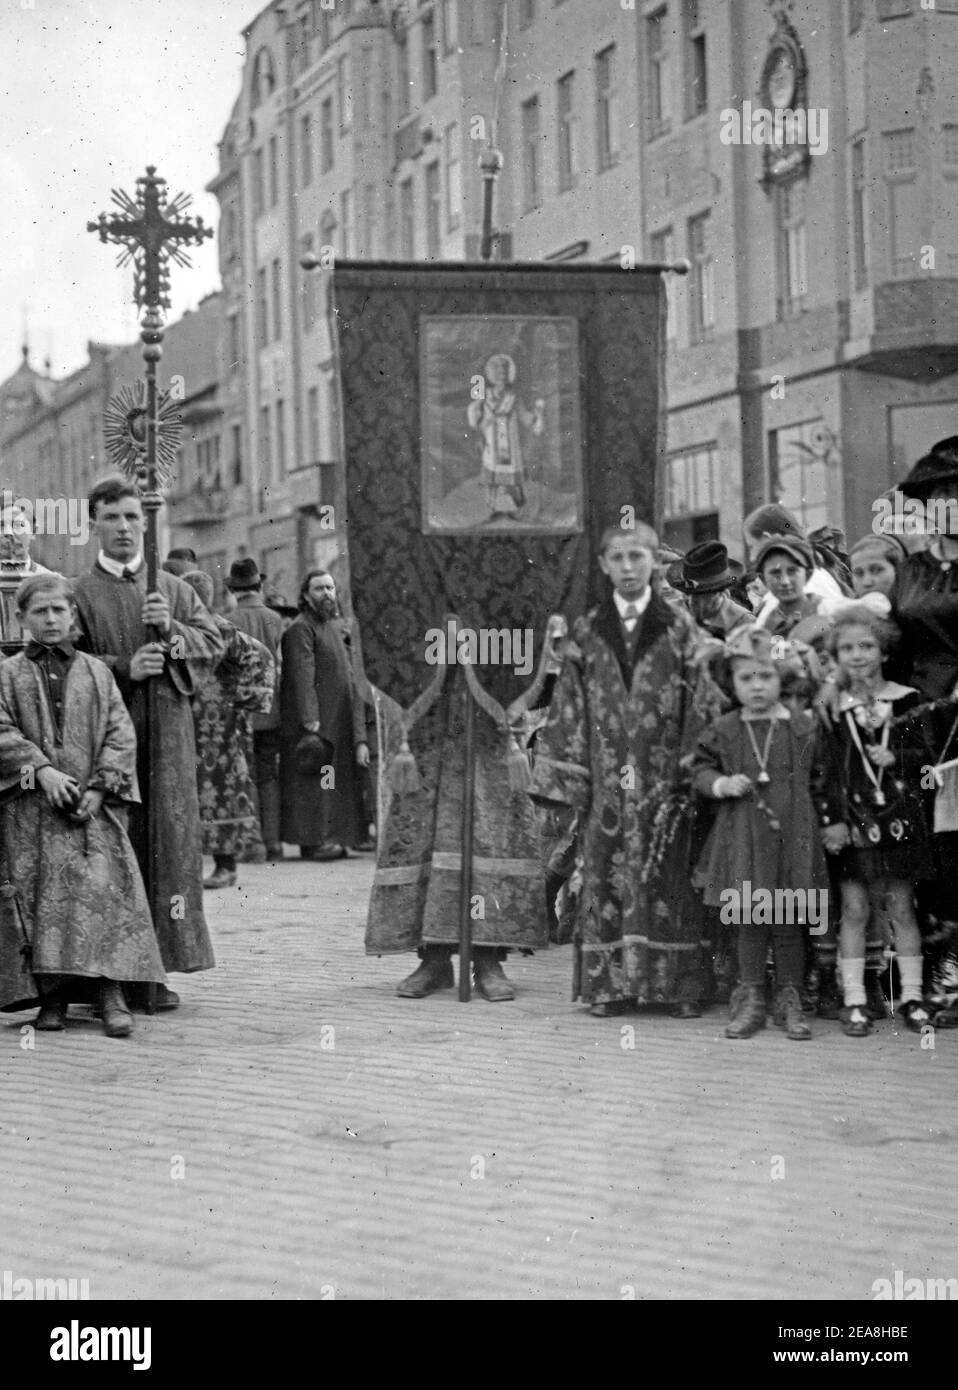 Fete days in Serbia. Scenes in a children's parade in Belgrade, the capital of Serbia. There are more  legal holidays exclusive of Sundays in Serbia, quite a Slav custom, and all businesses is suspended in order that the populace may participate in the parades or watch them as they pass through the streets - August 1920 Stock Photo